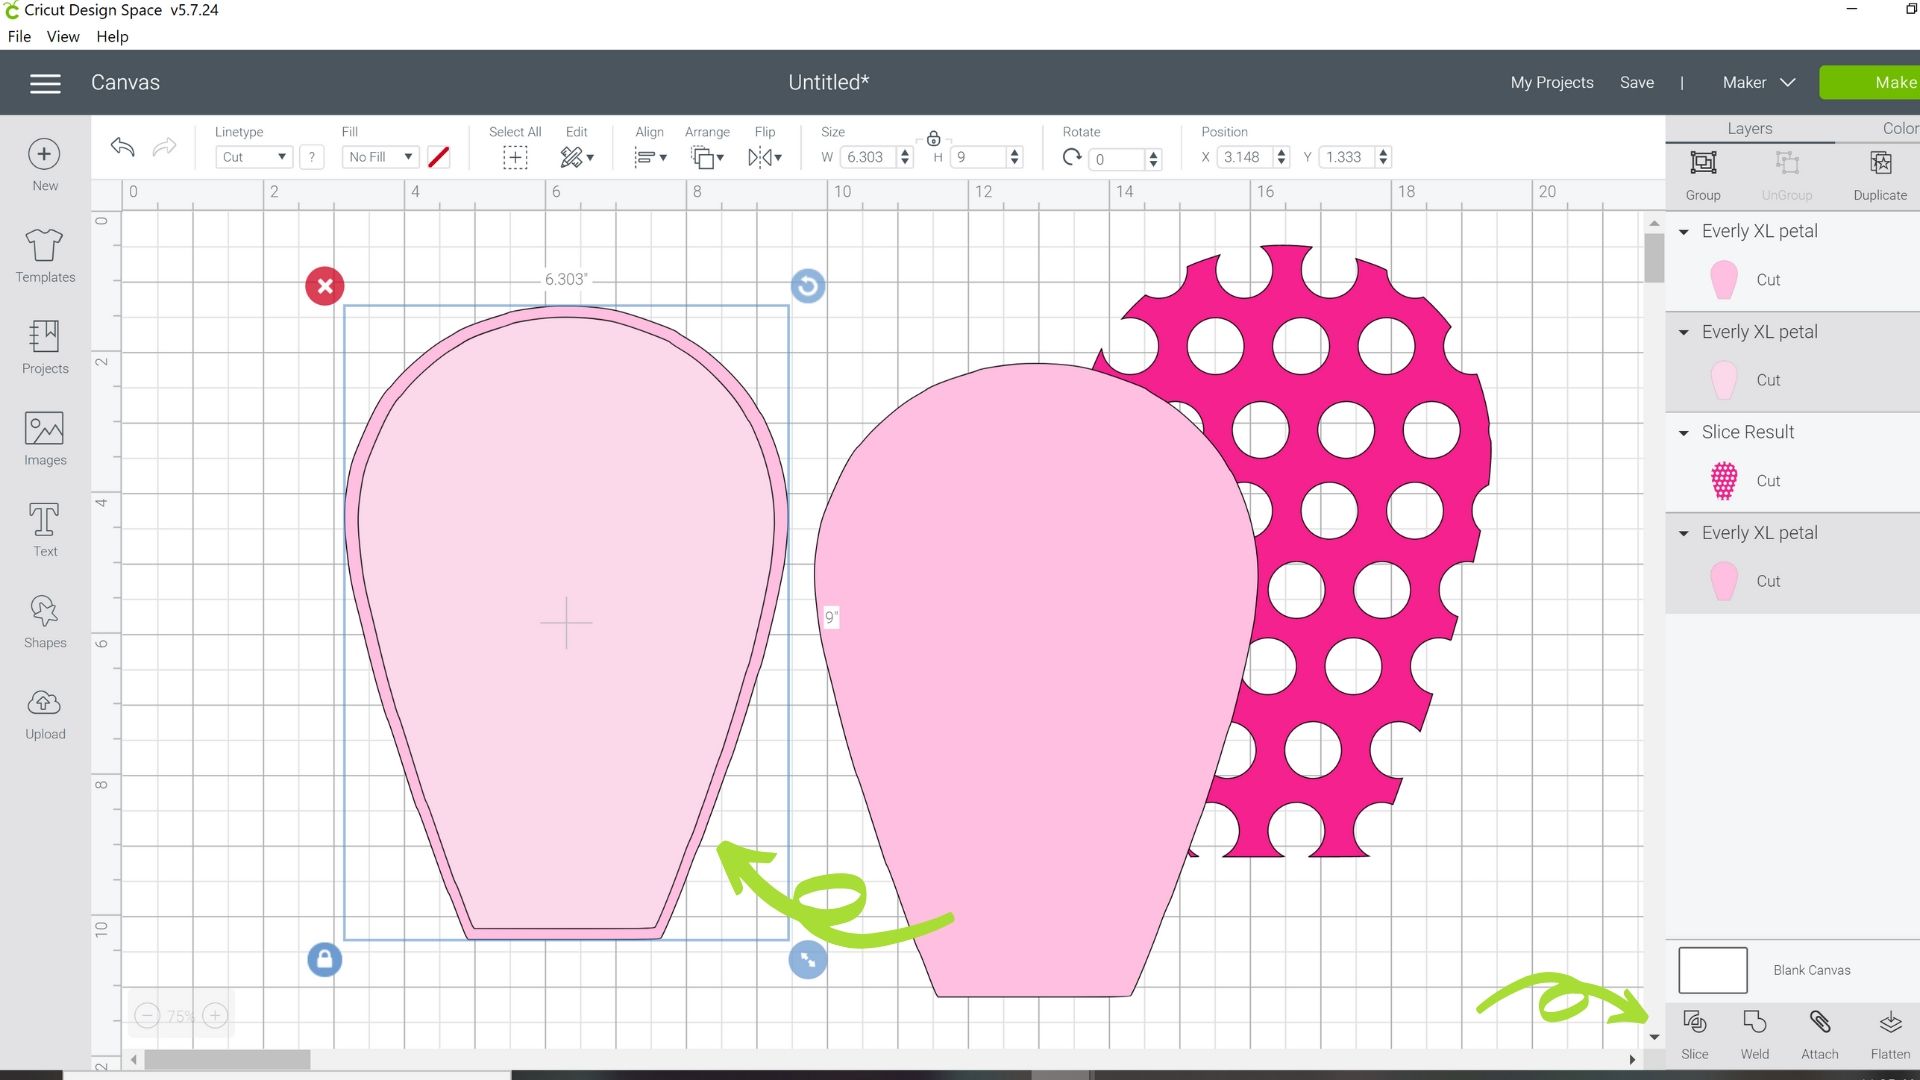 A design space screenshot showing a duplicate pink petal design. There are three pink petal shapes on the canvas screen - one with an outline around the edge, a light pink petal, and a darker pink polka dot petal.